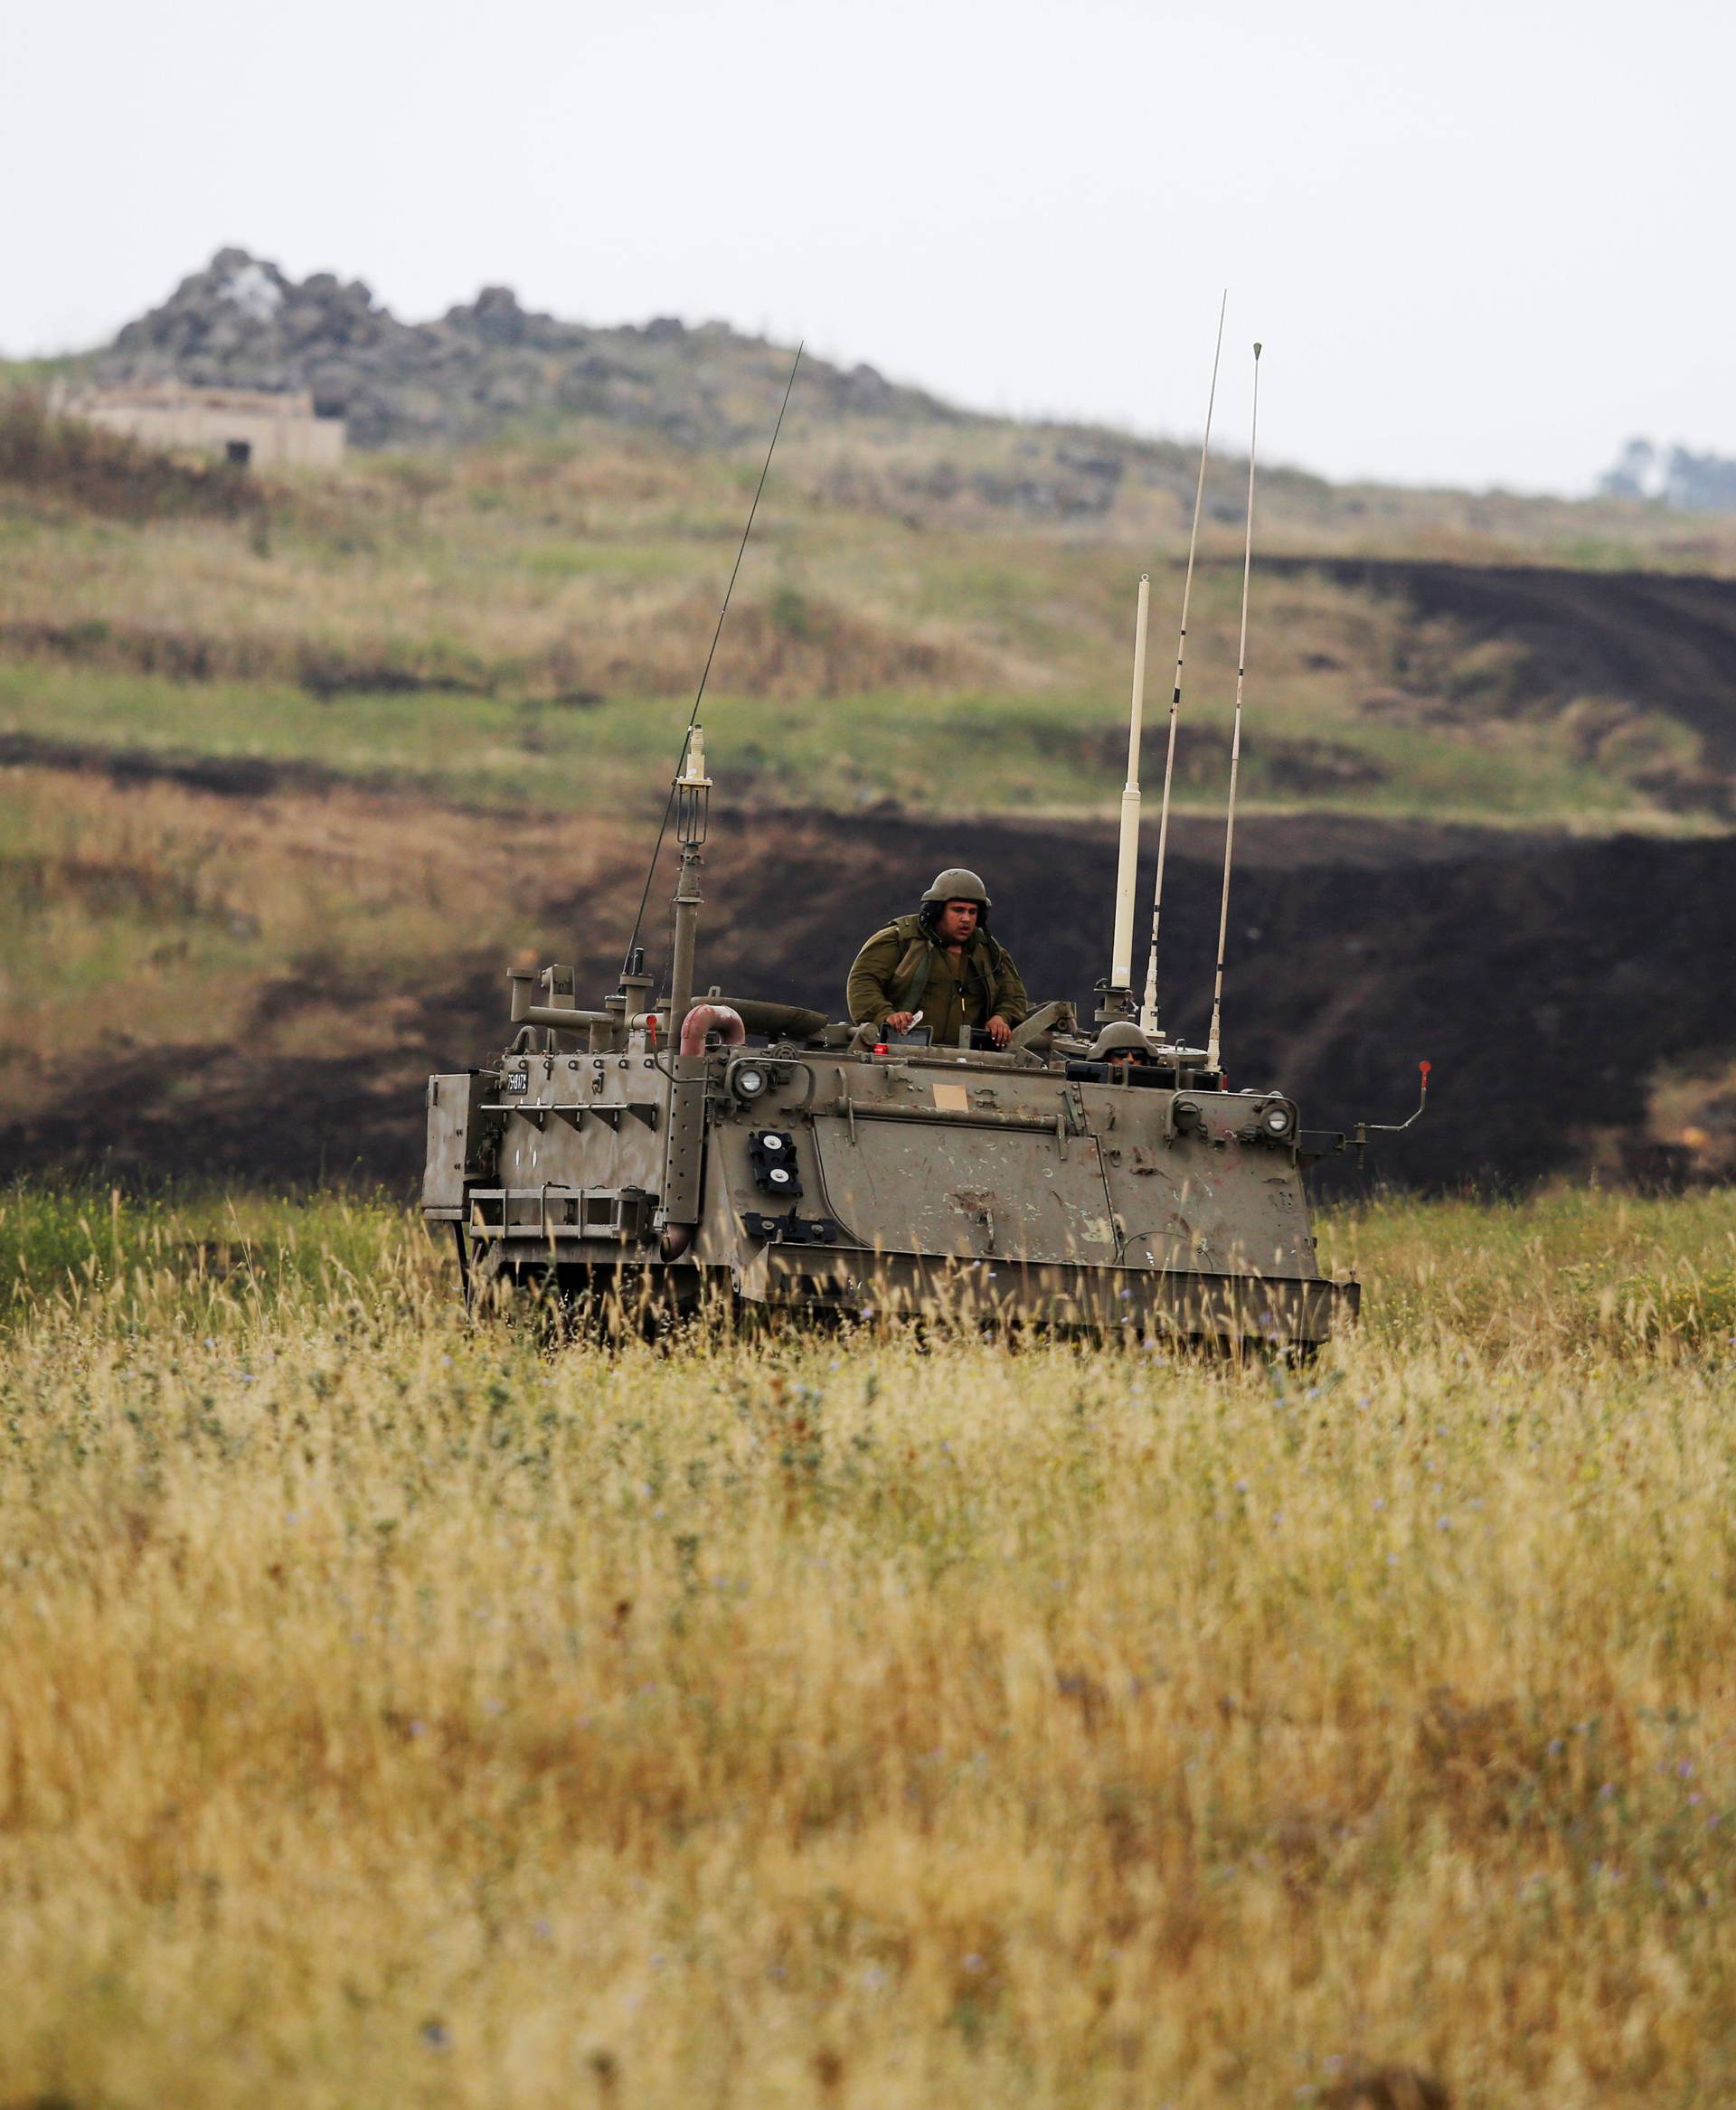 An Israeli soldier sits on an APC as it drives near the Israeli side of the border with Syria in the Israeli-occupied Golan Heights